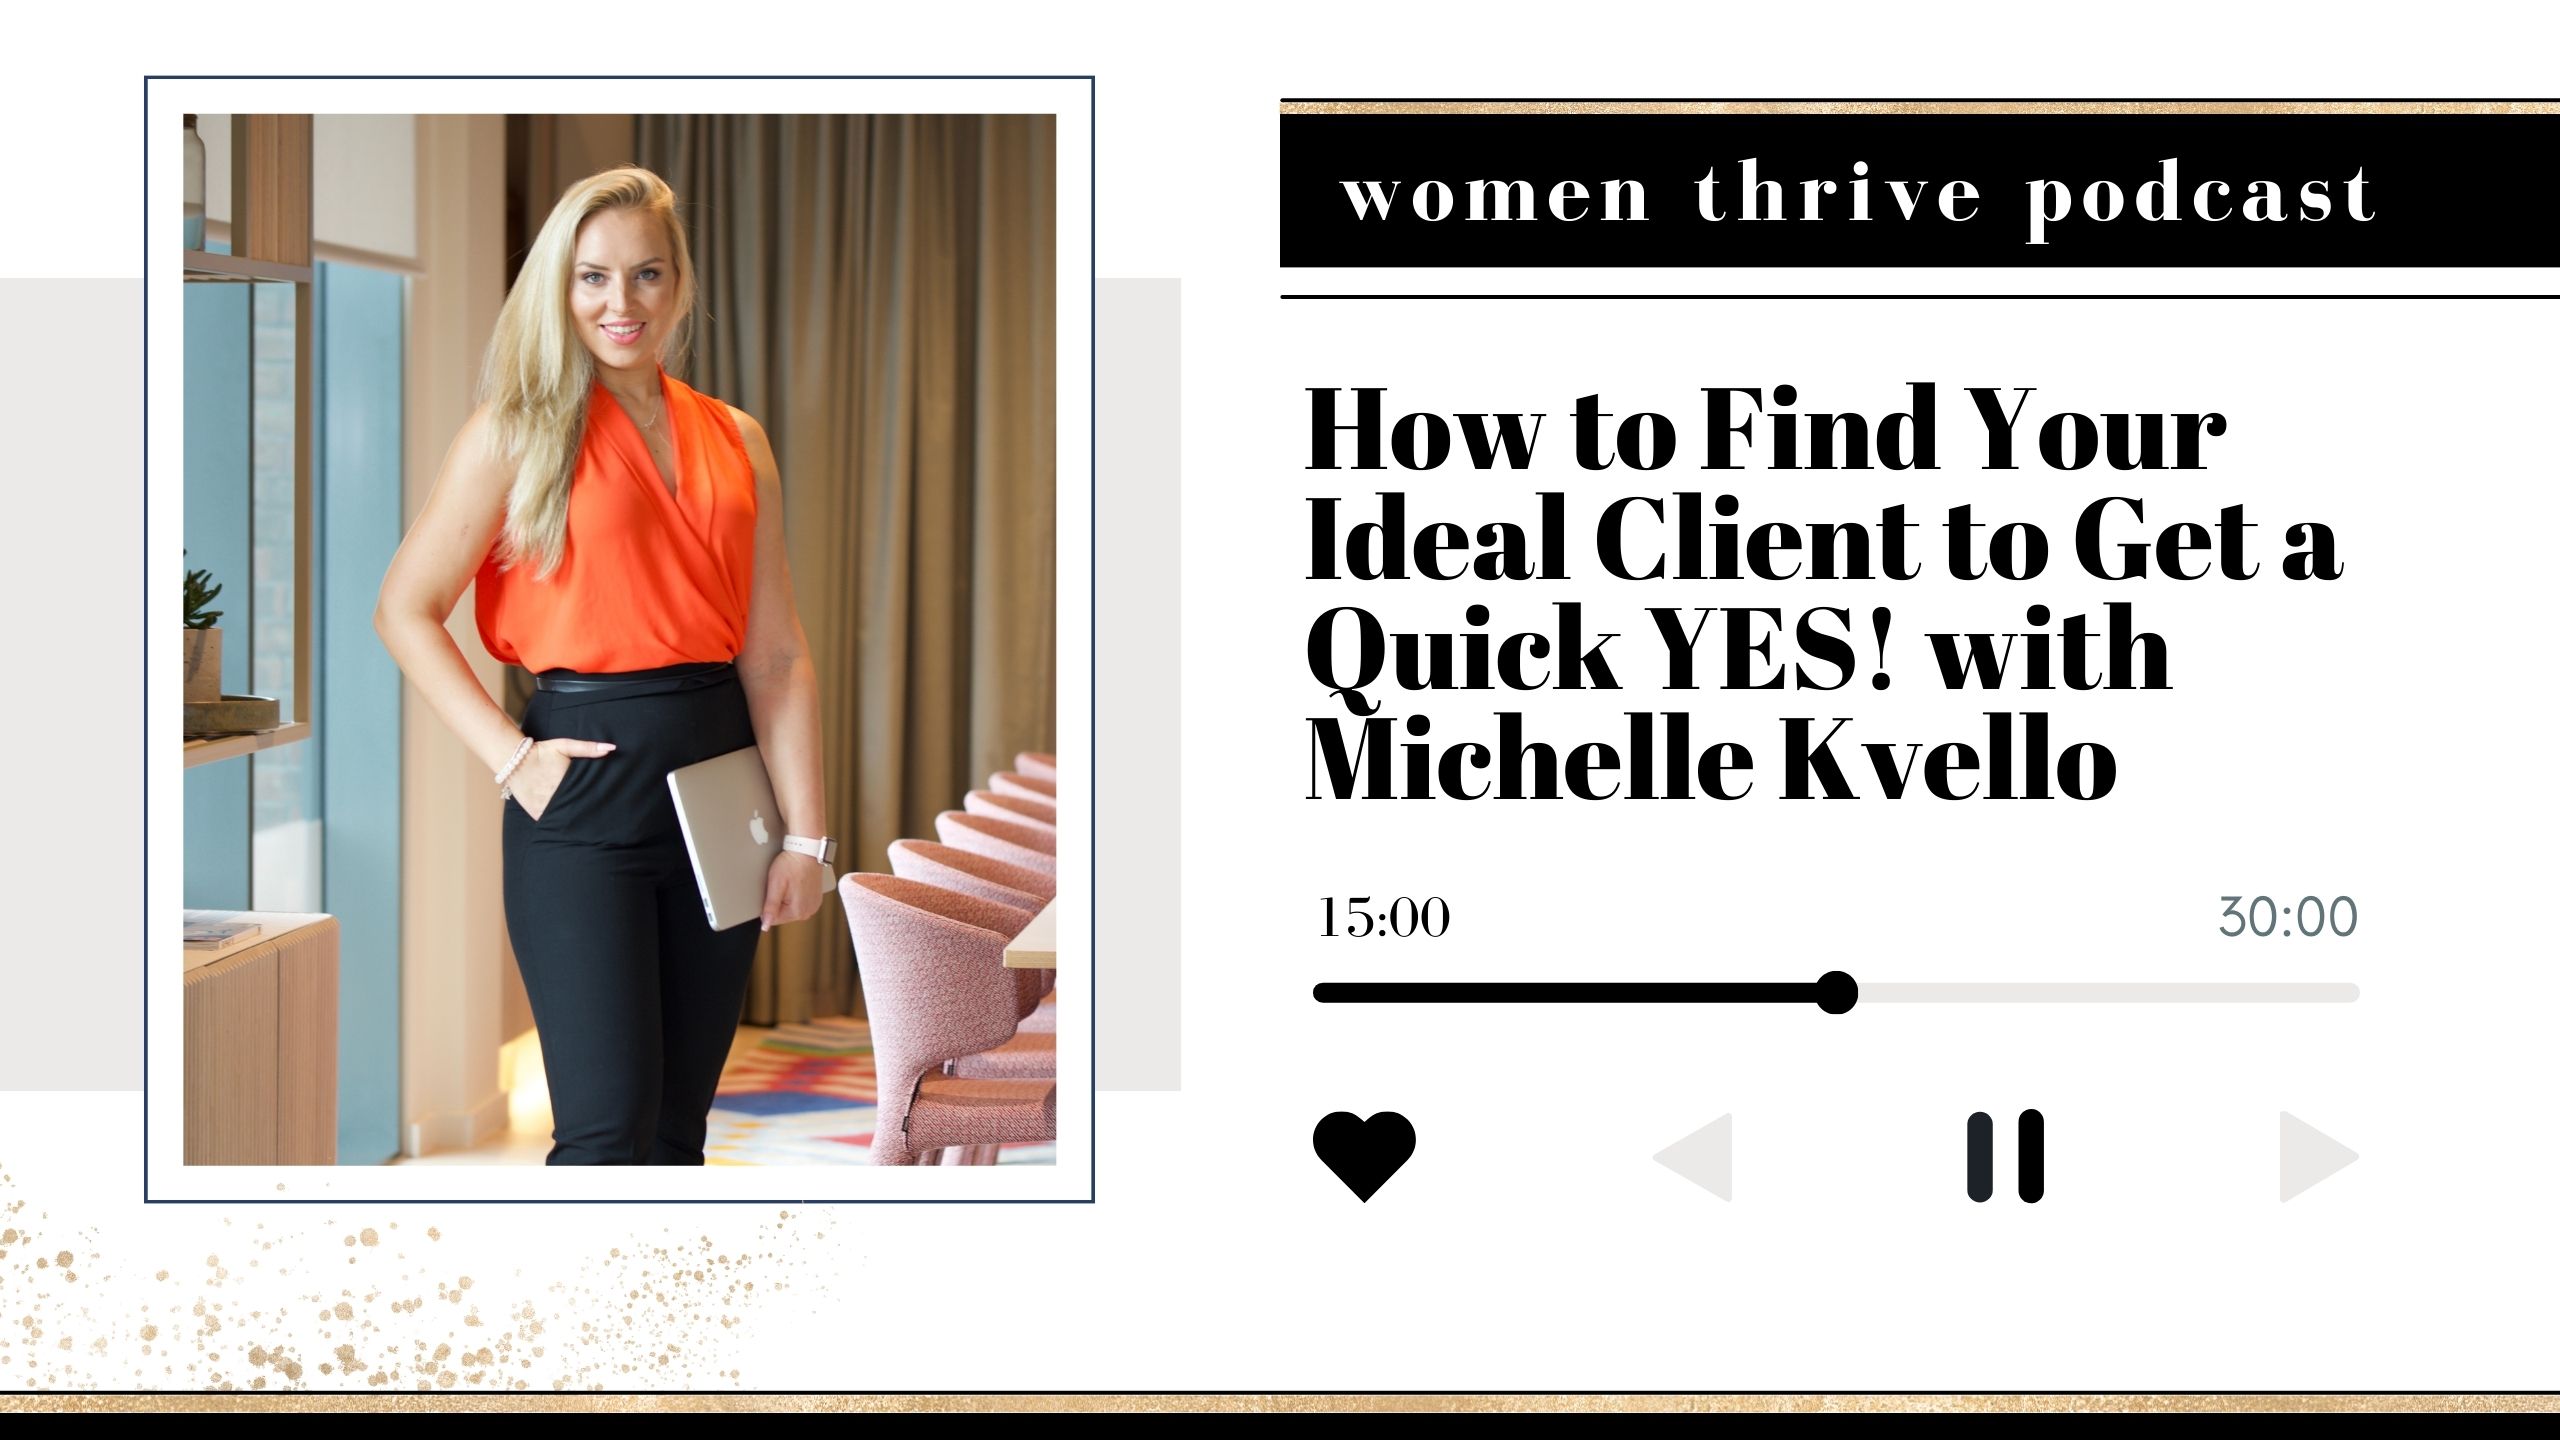 How to Find Your Ideal Client to Get a Quick YES! with Michelle Kvello